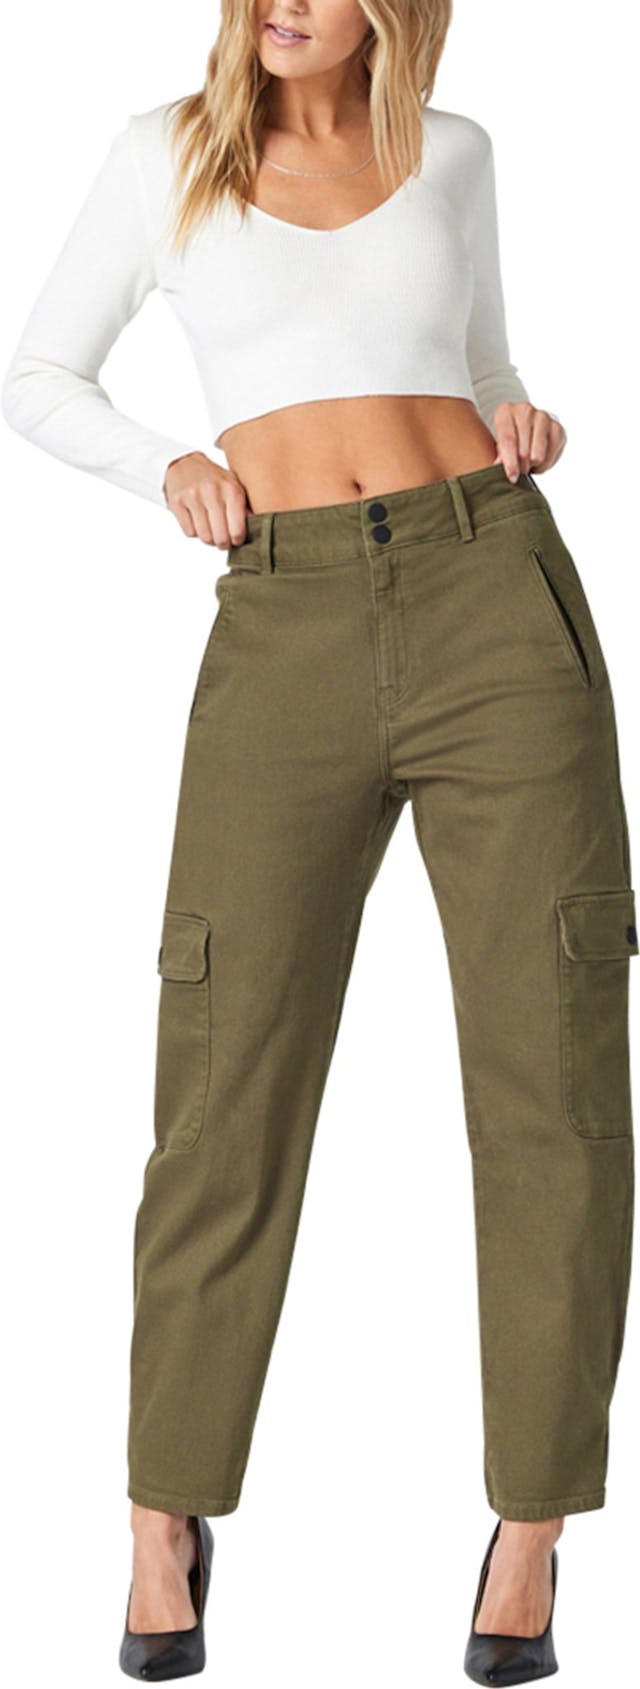 Product image for Elsie Cargo Pants - Women's